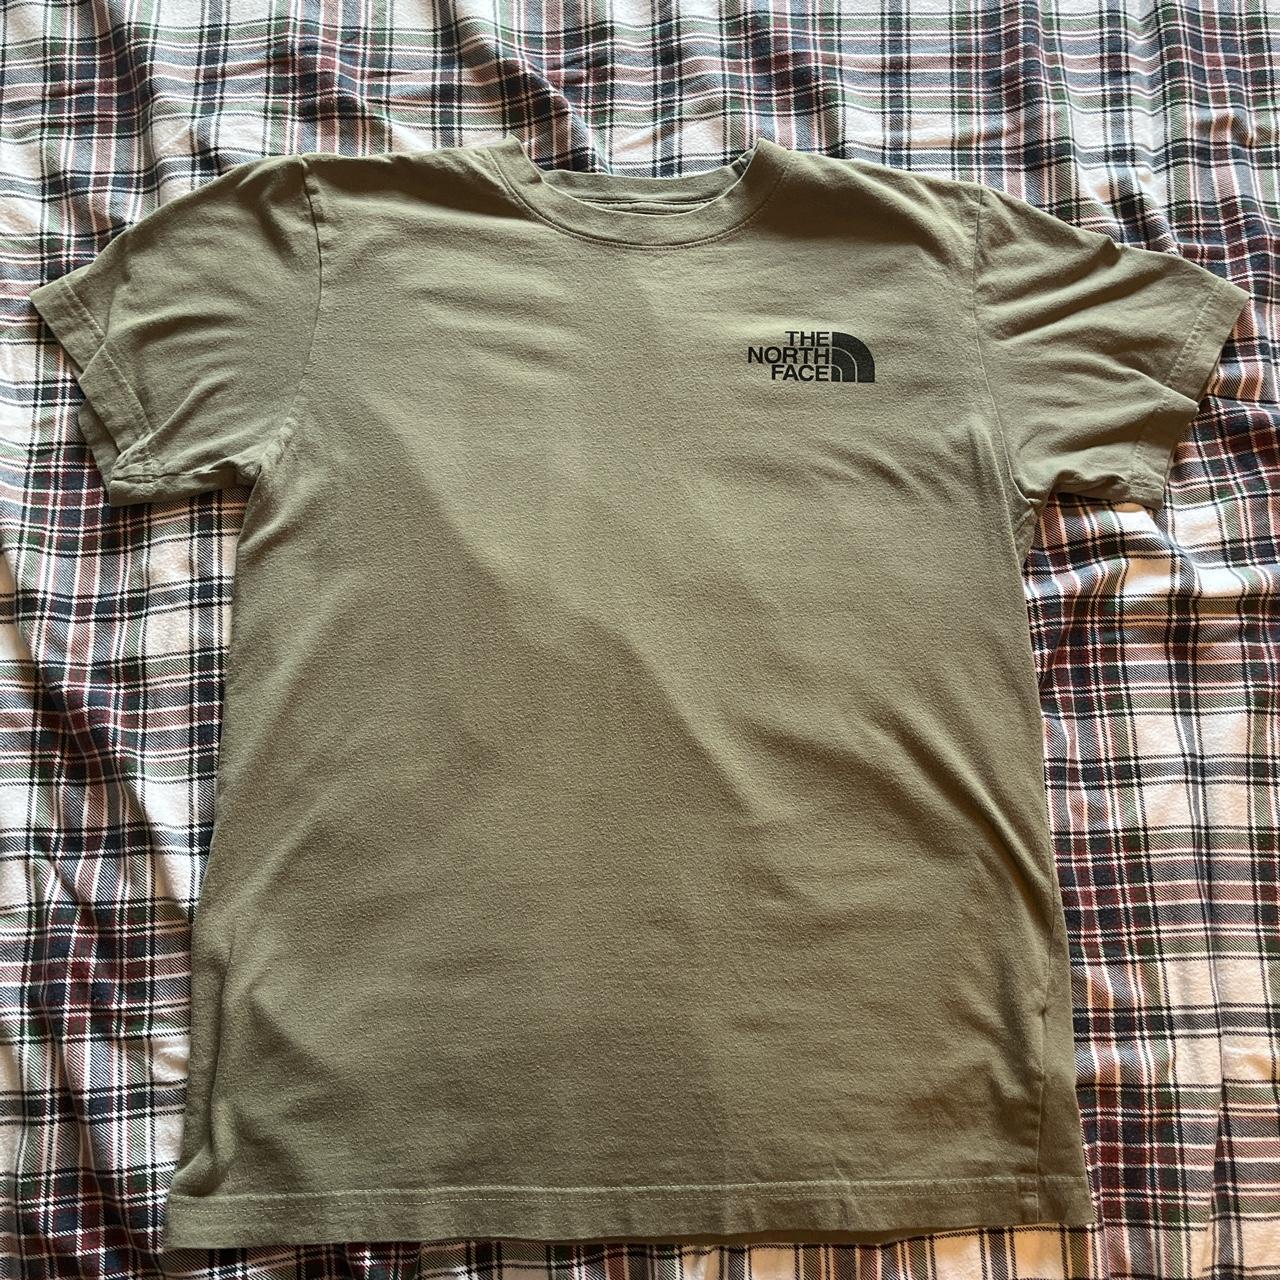 The North Face Men's Green T-shirt